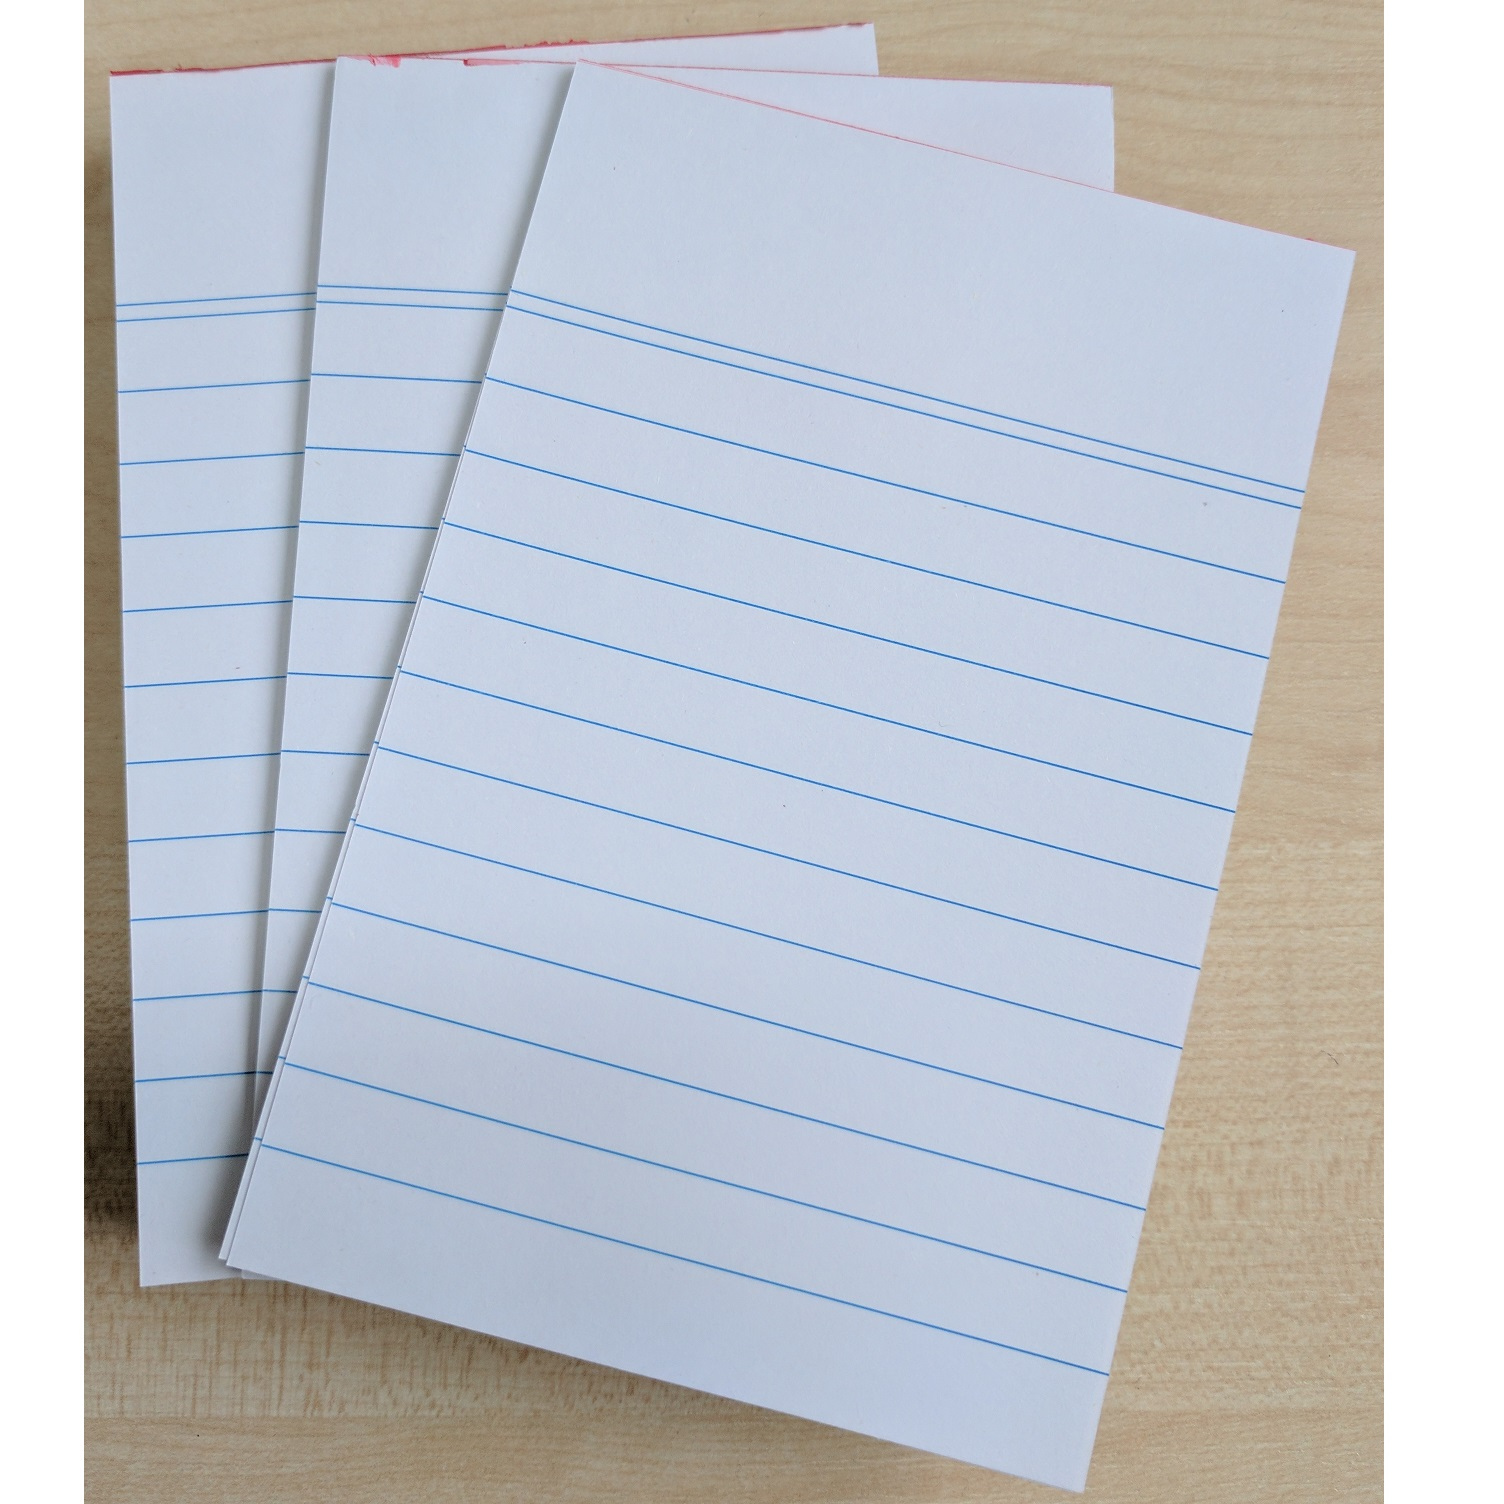 8 X A6 Lined Paper Writing Pads 20 Pages Each Stationery Reporters 